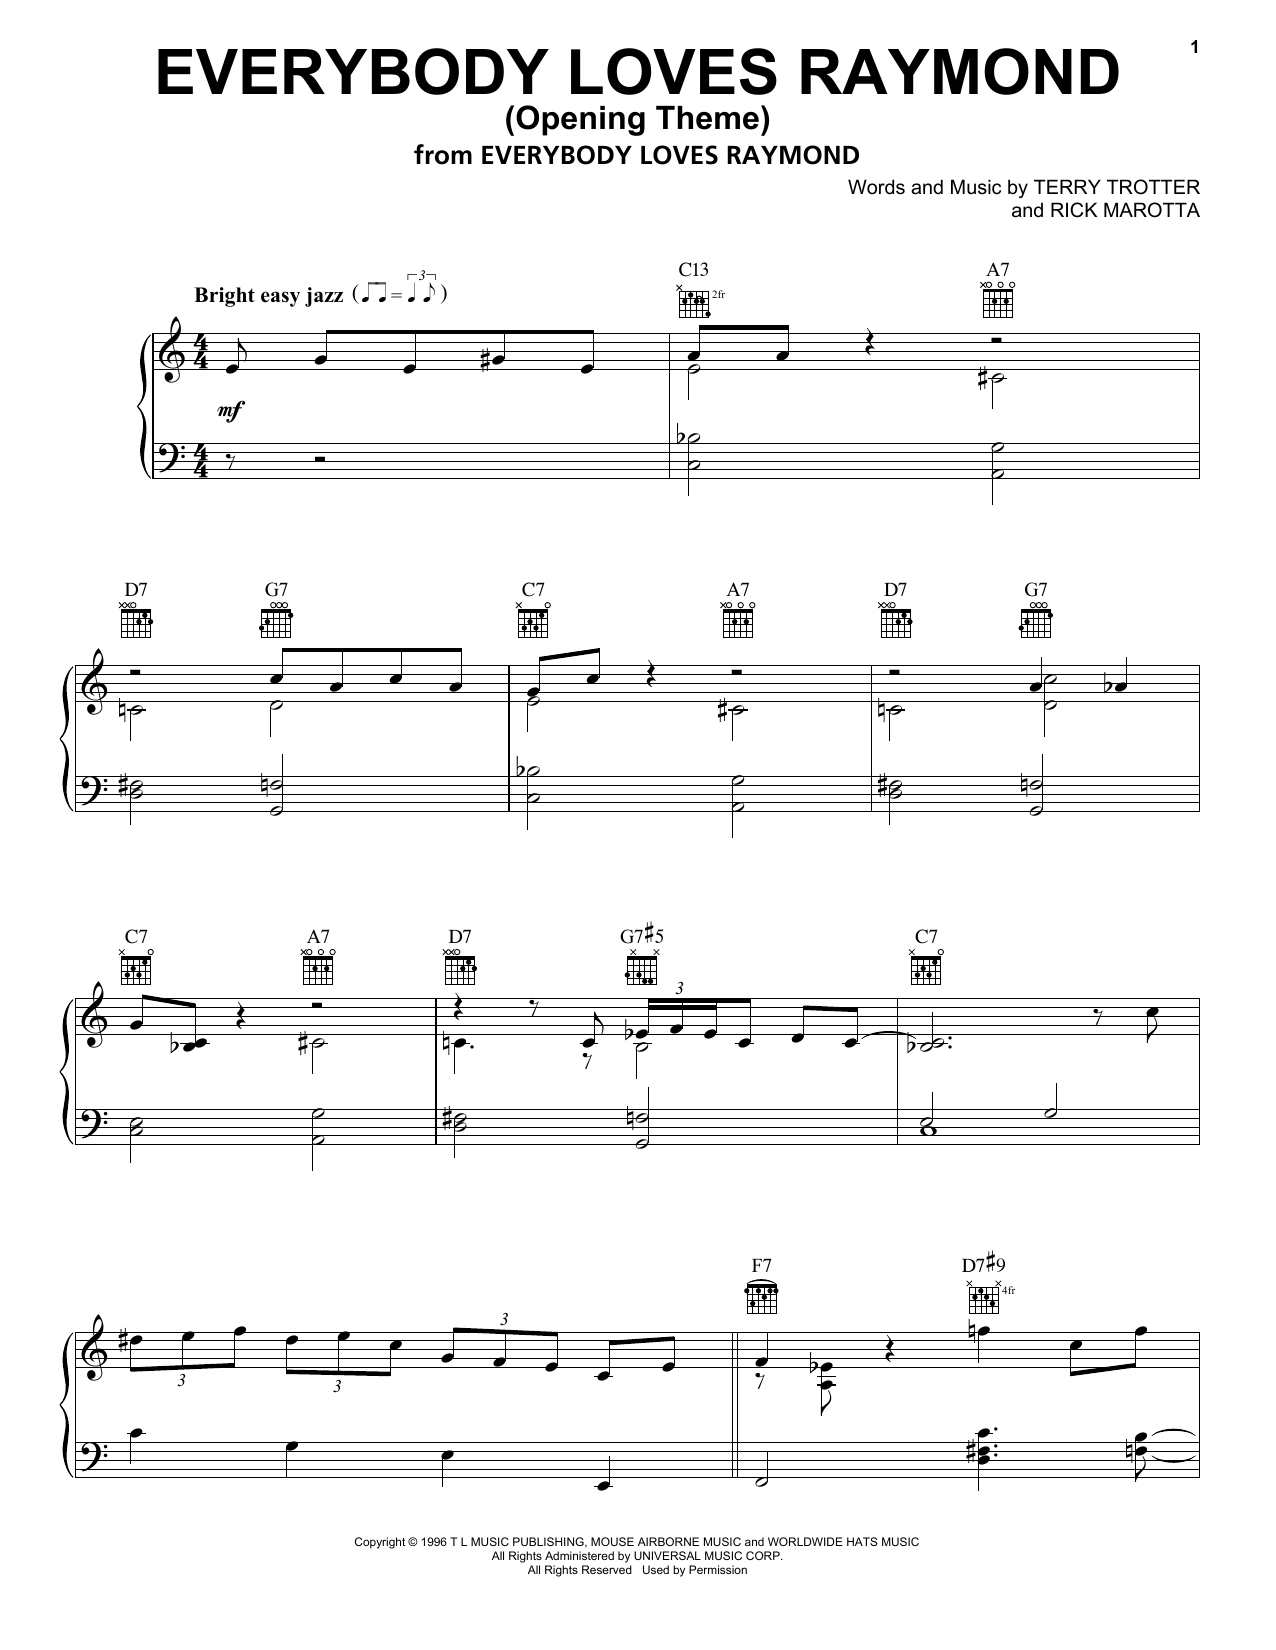 Download Rick Marotta and Terry Trotter Everybody Loves Raymond (Opening Theme) Sheet Music